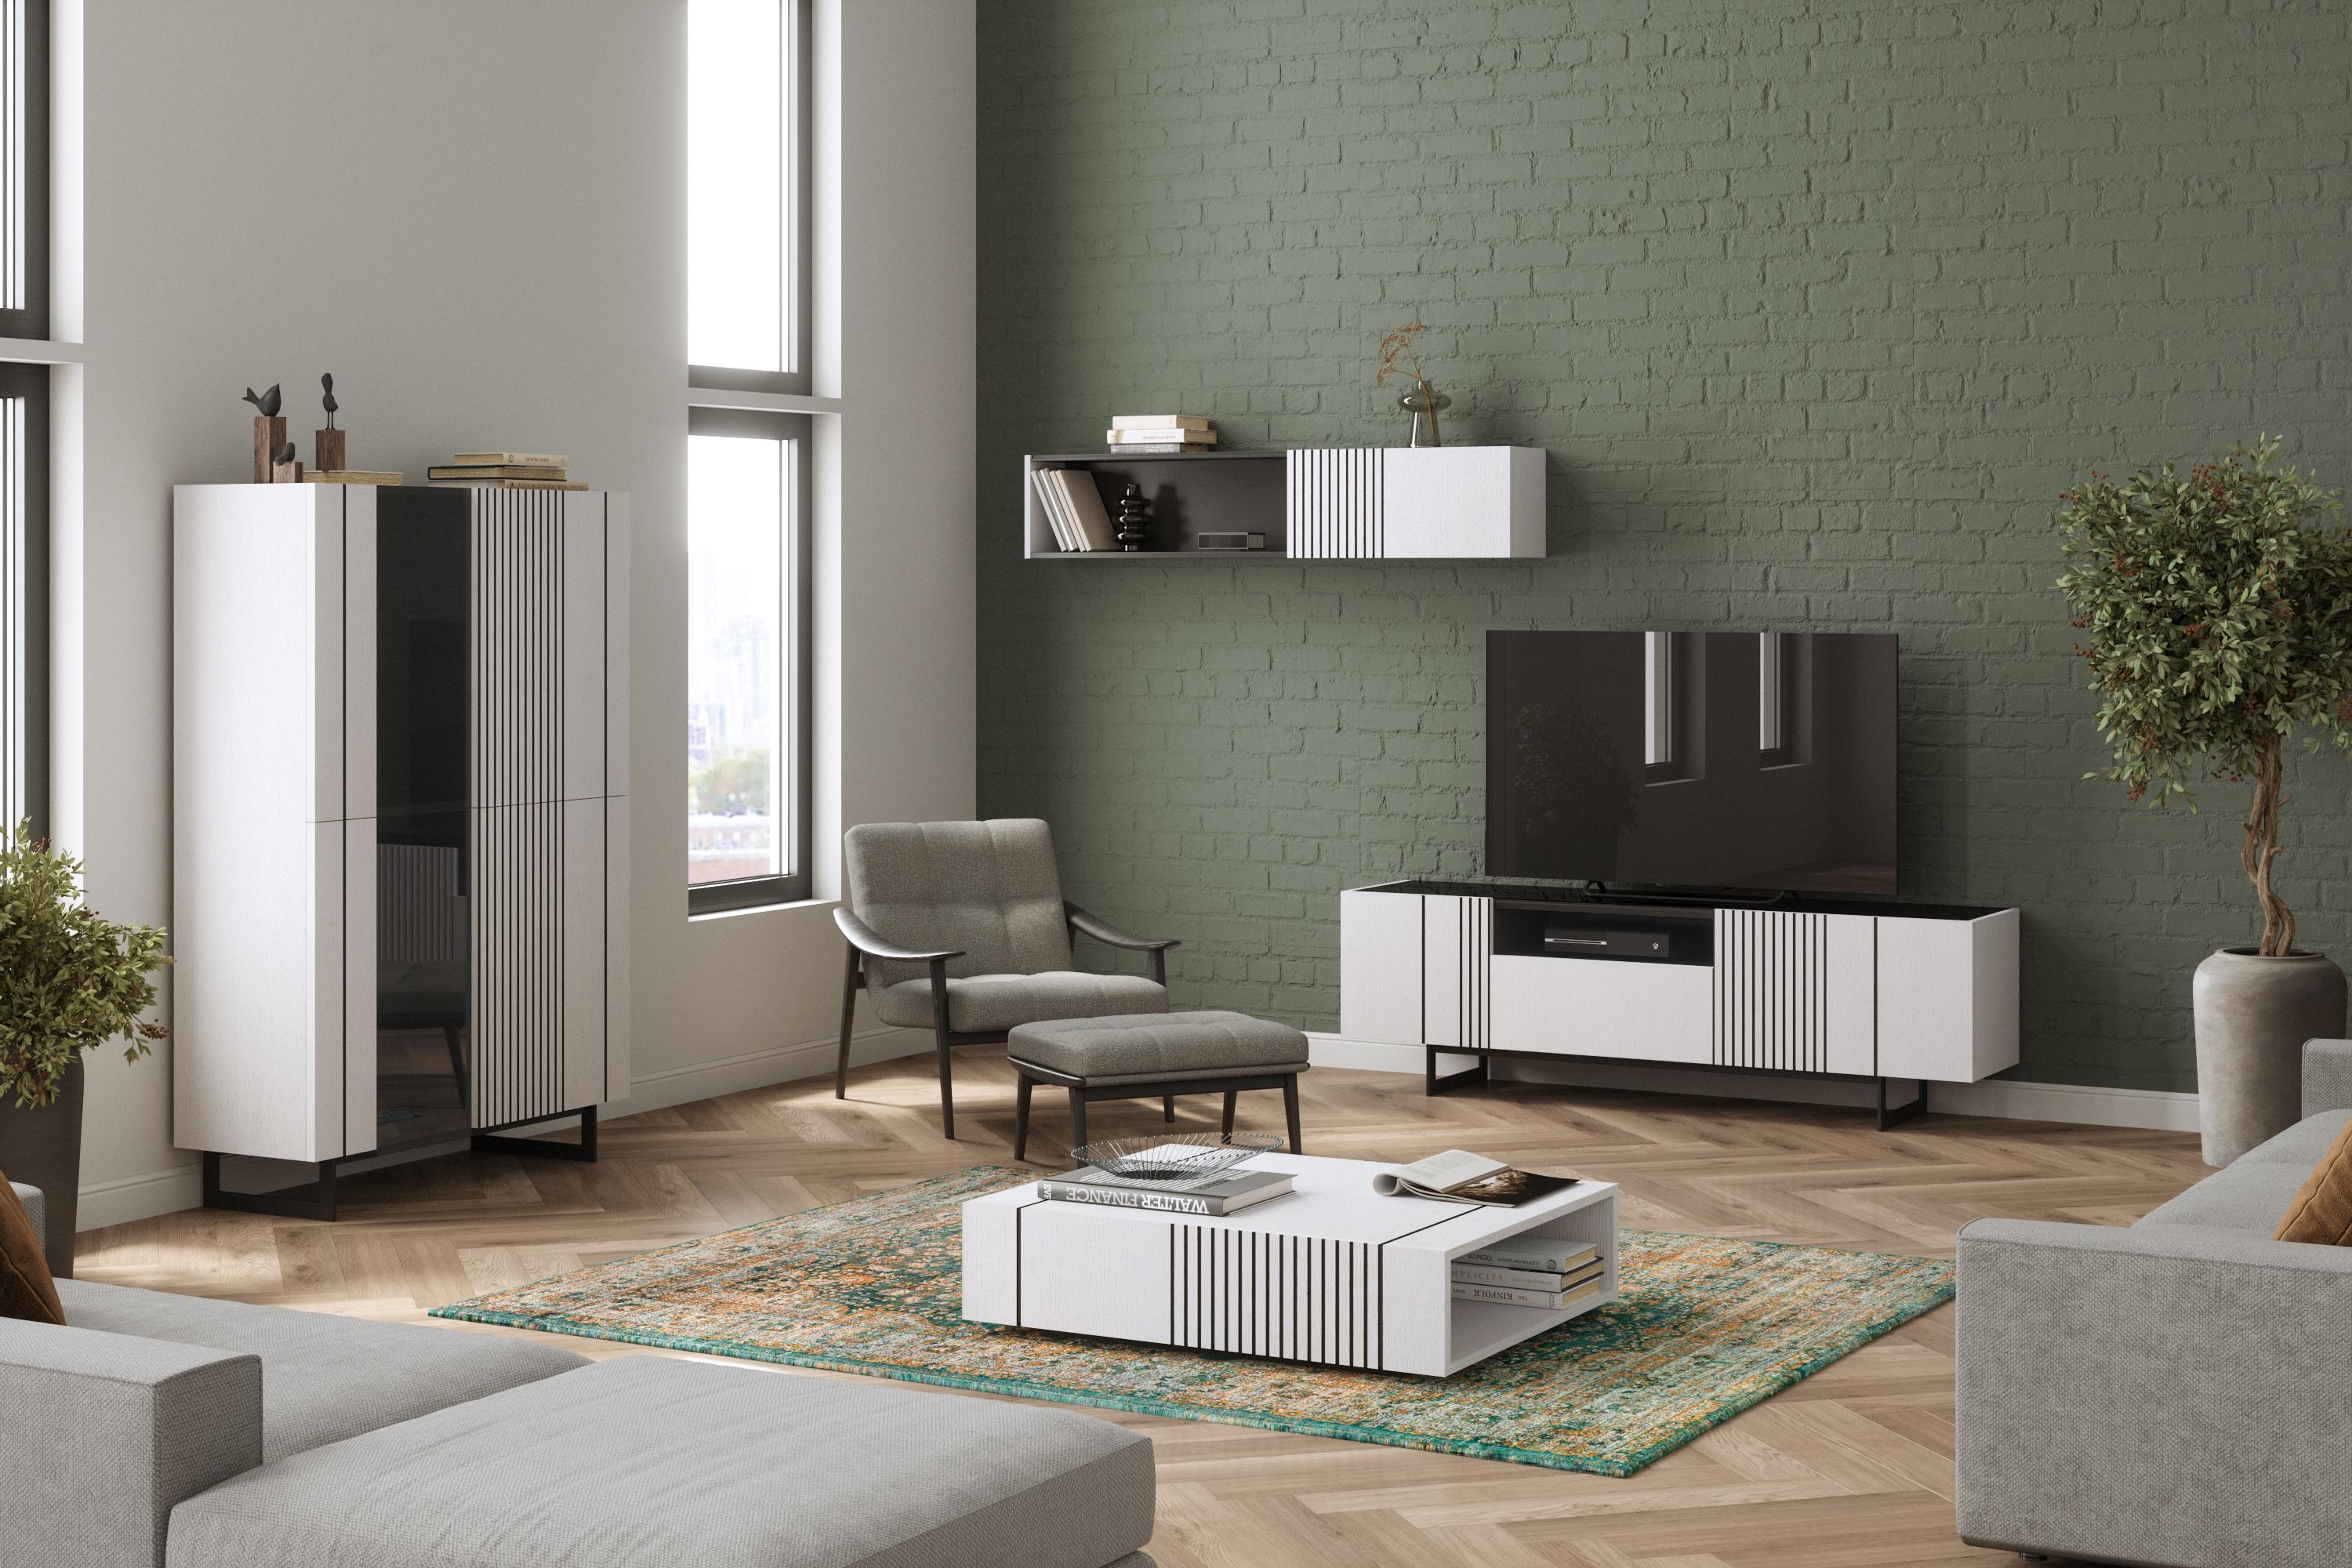 *Collection not sold in France, exclusive to Mobilier de France.*

The Piana collection is one of Cacio's bestsellers, with Scandinavian inspiration, this line is available in several shades of oak ranging from lighter to darker tones. For greater